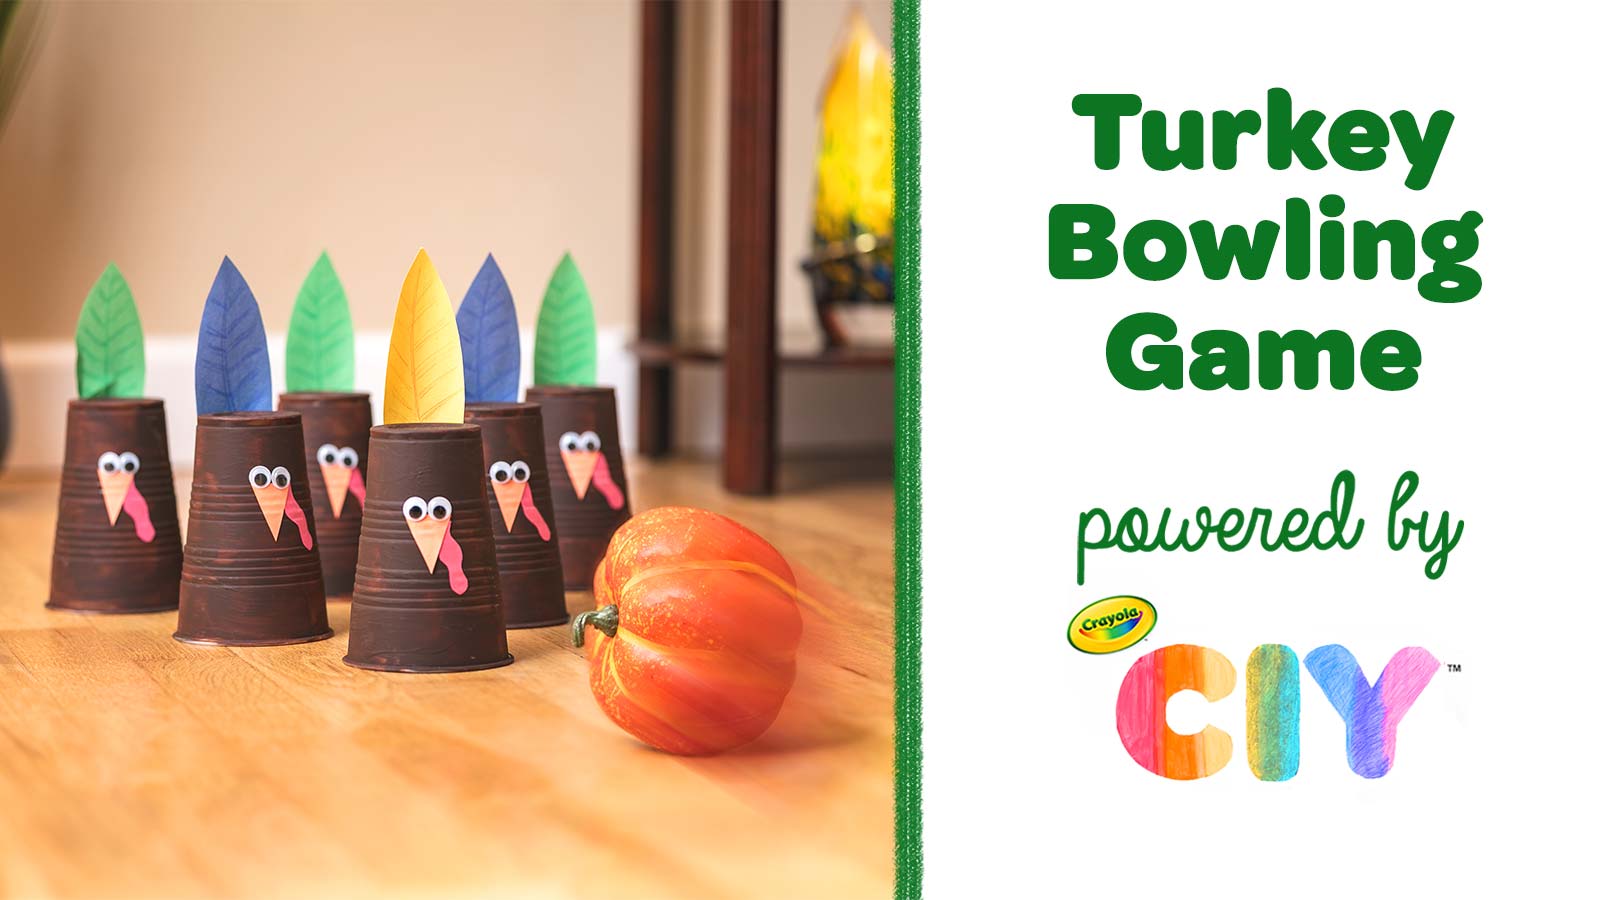 Turkey Bowling Game for Thanksgiving Crafts Crayola Crayola CIY, DIY Crafts for Kids and Adults crayola